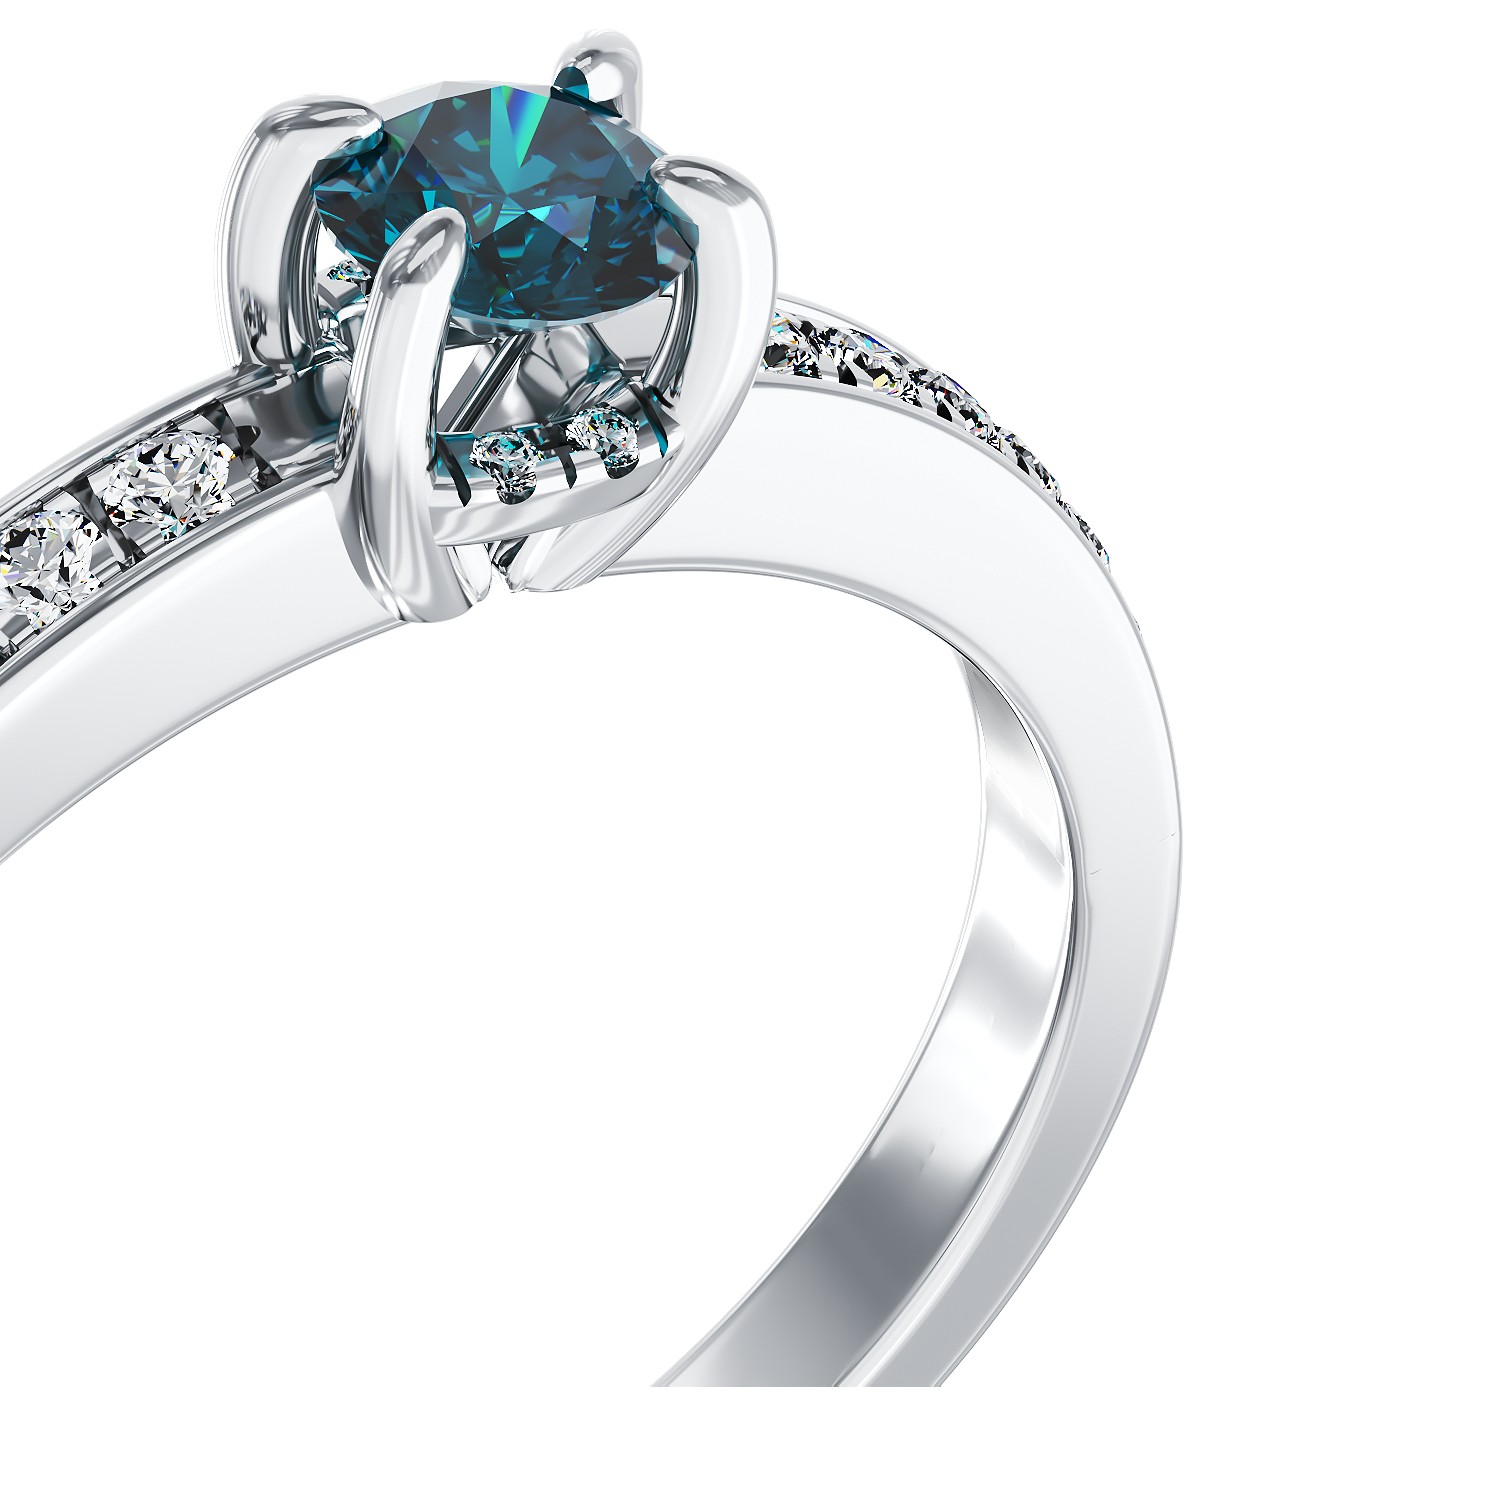 18K white gold engagement ring with 0.22ct blue diamond and 0.13ct diamonds